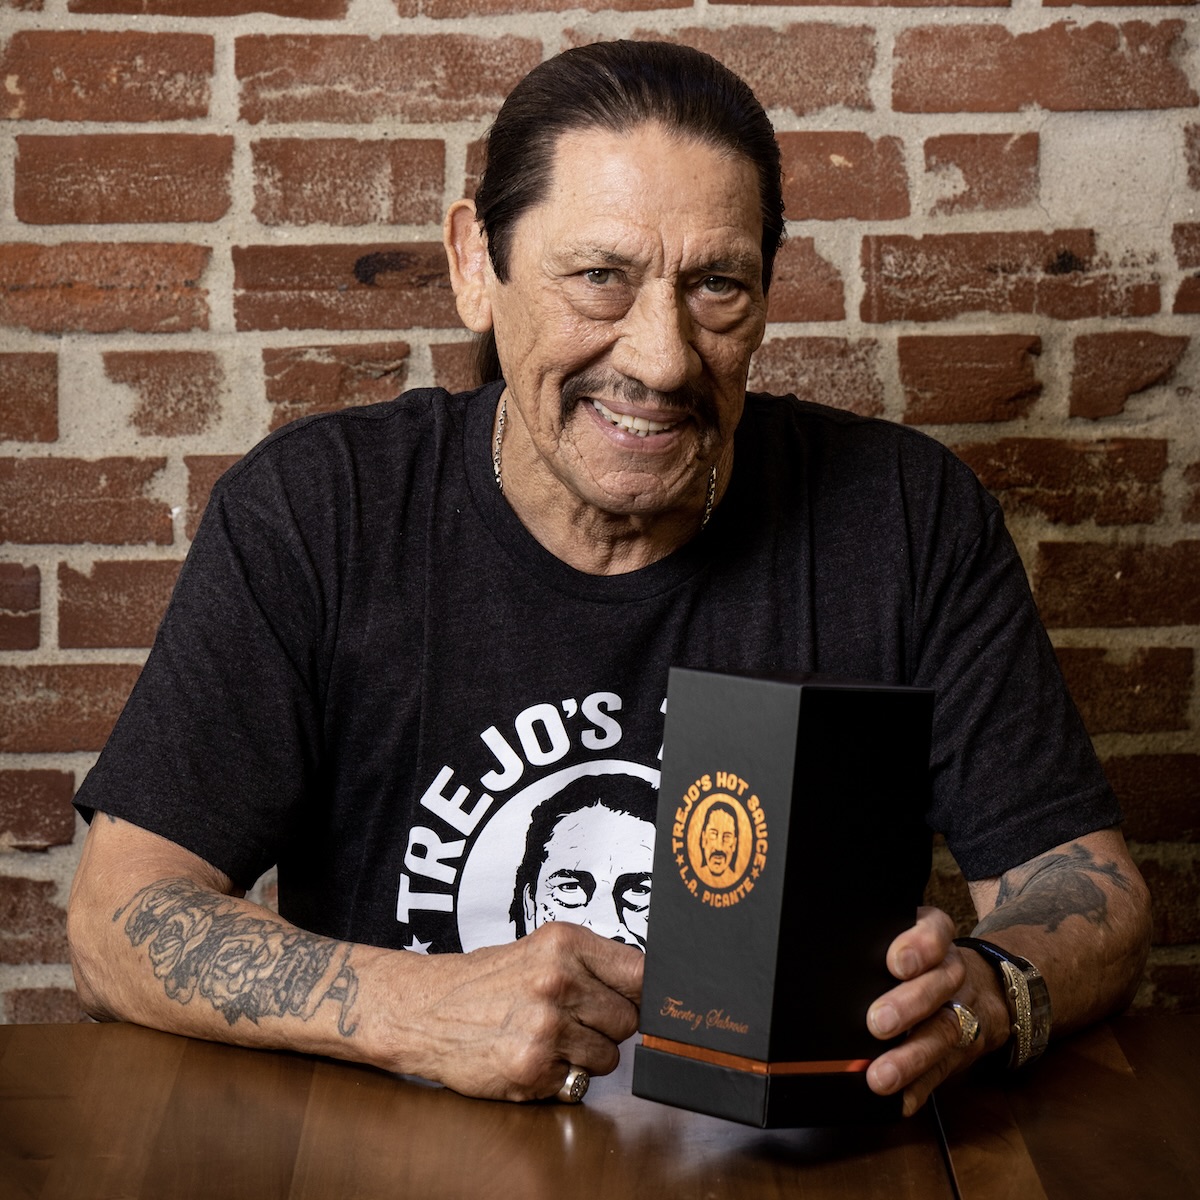 Give the gift of spice this holiday season with a signed bottle of limited-edition Trejo’s Tacos hot sauce. 